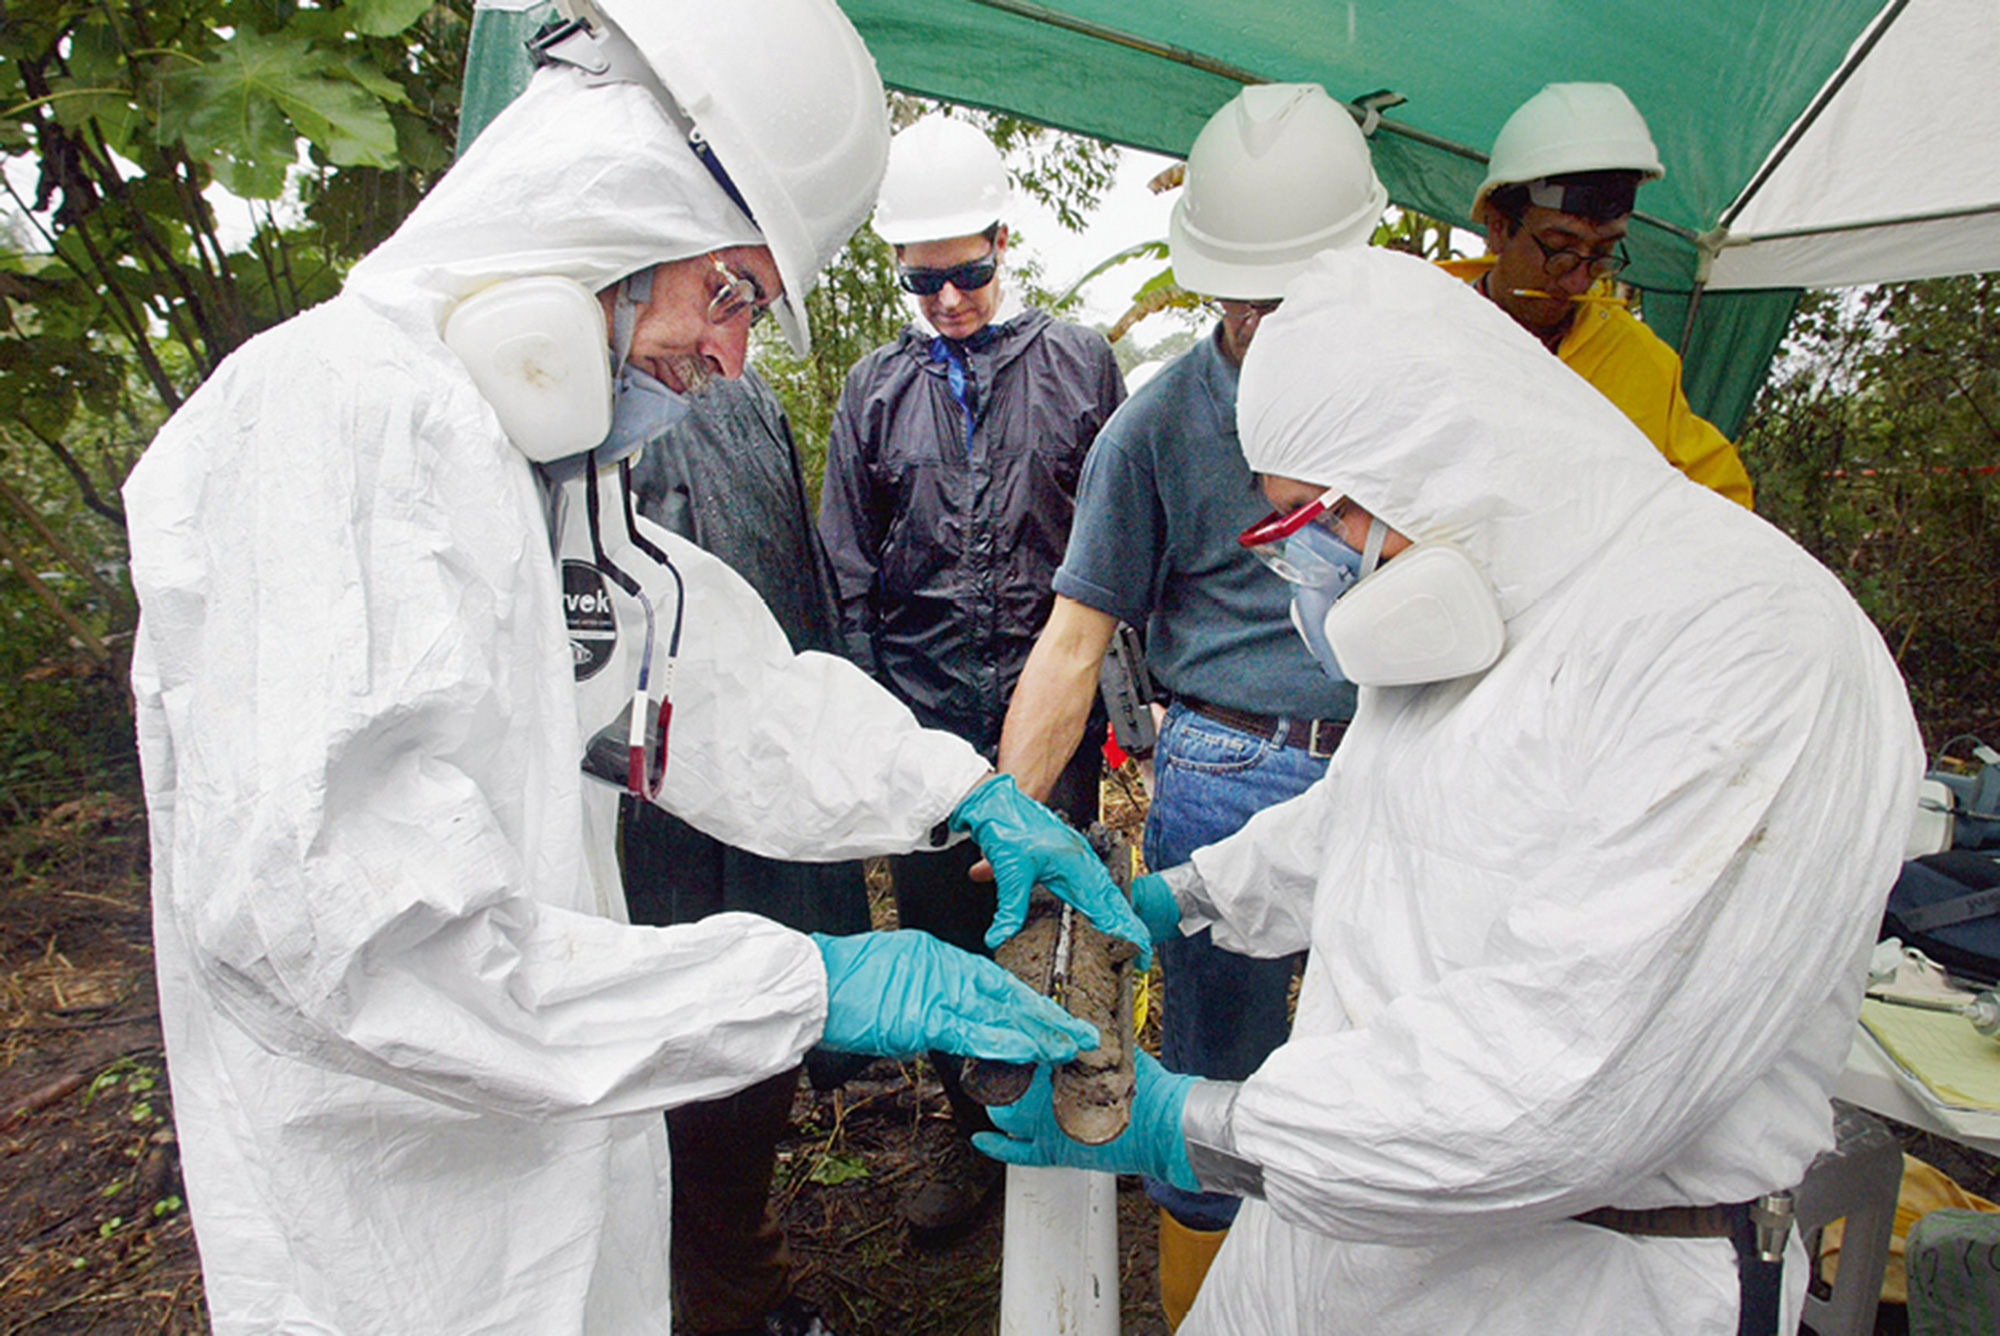 Lou Dematteis’s photograph of Chevron technical expert John Connors overseeing technicians in hazmat suits checking a soil sample for evidence of crude oil during judicial inspections at an old Texaco well site near the town of Sacha.